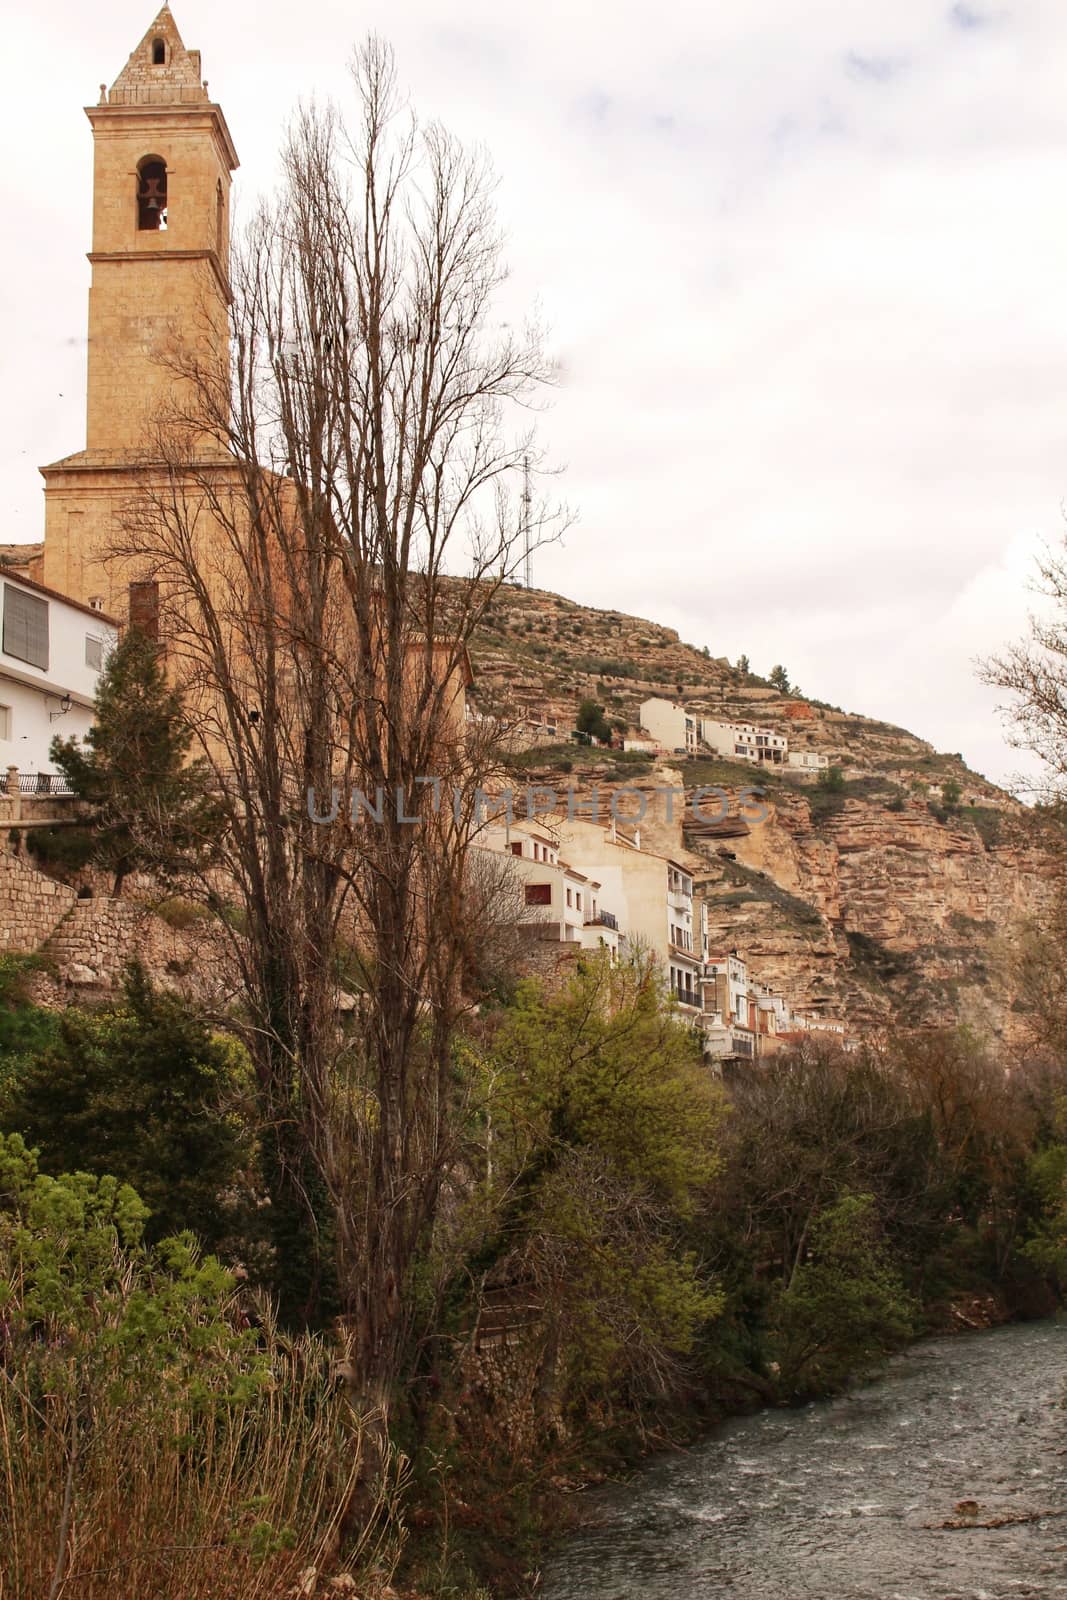 Beautiful overview of the town of Alcala de Jucar with the fortress castle and the church in spring under gray sky